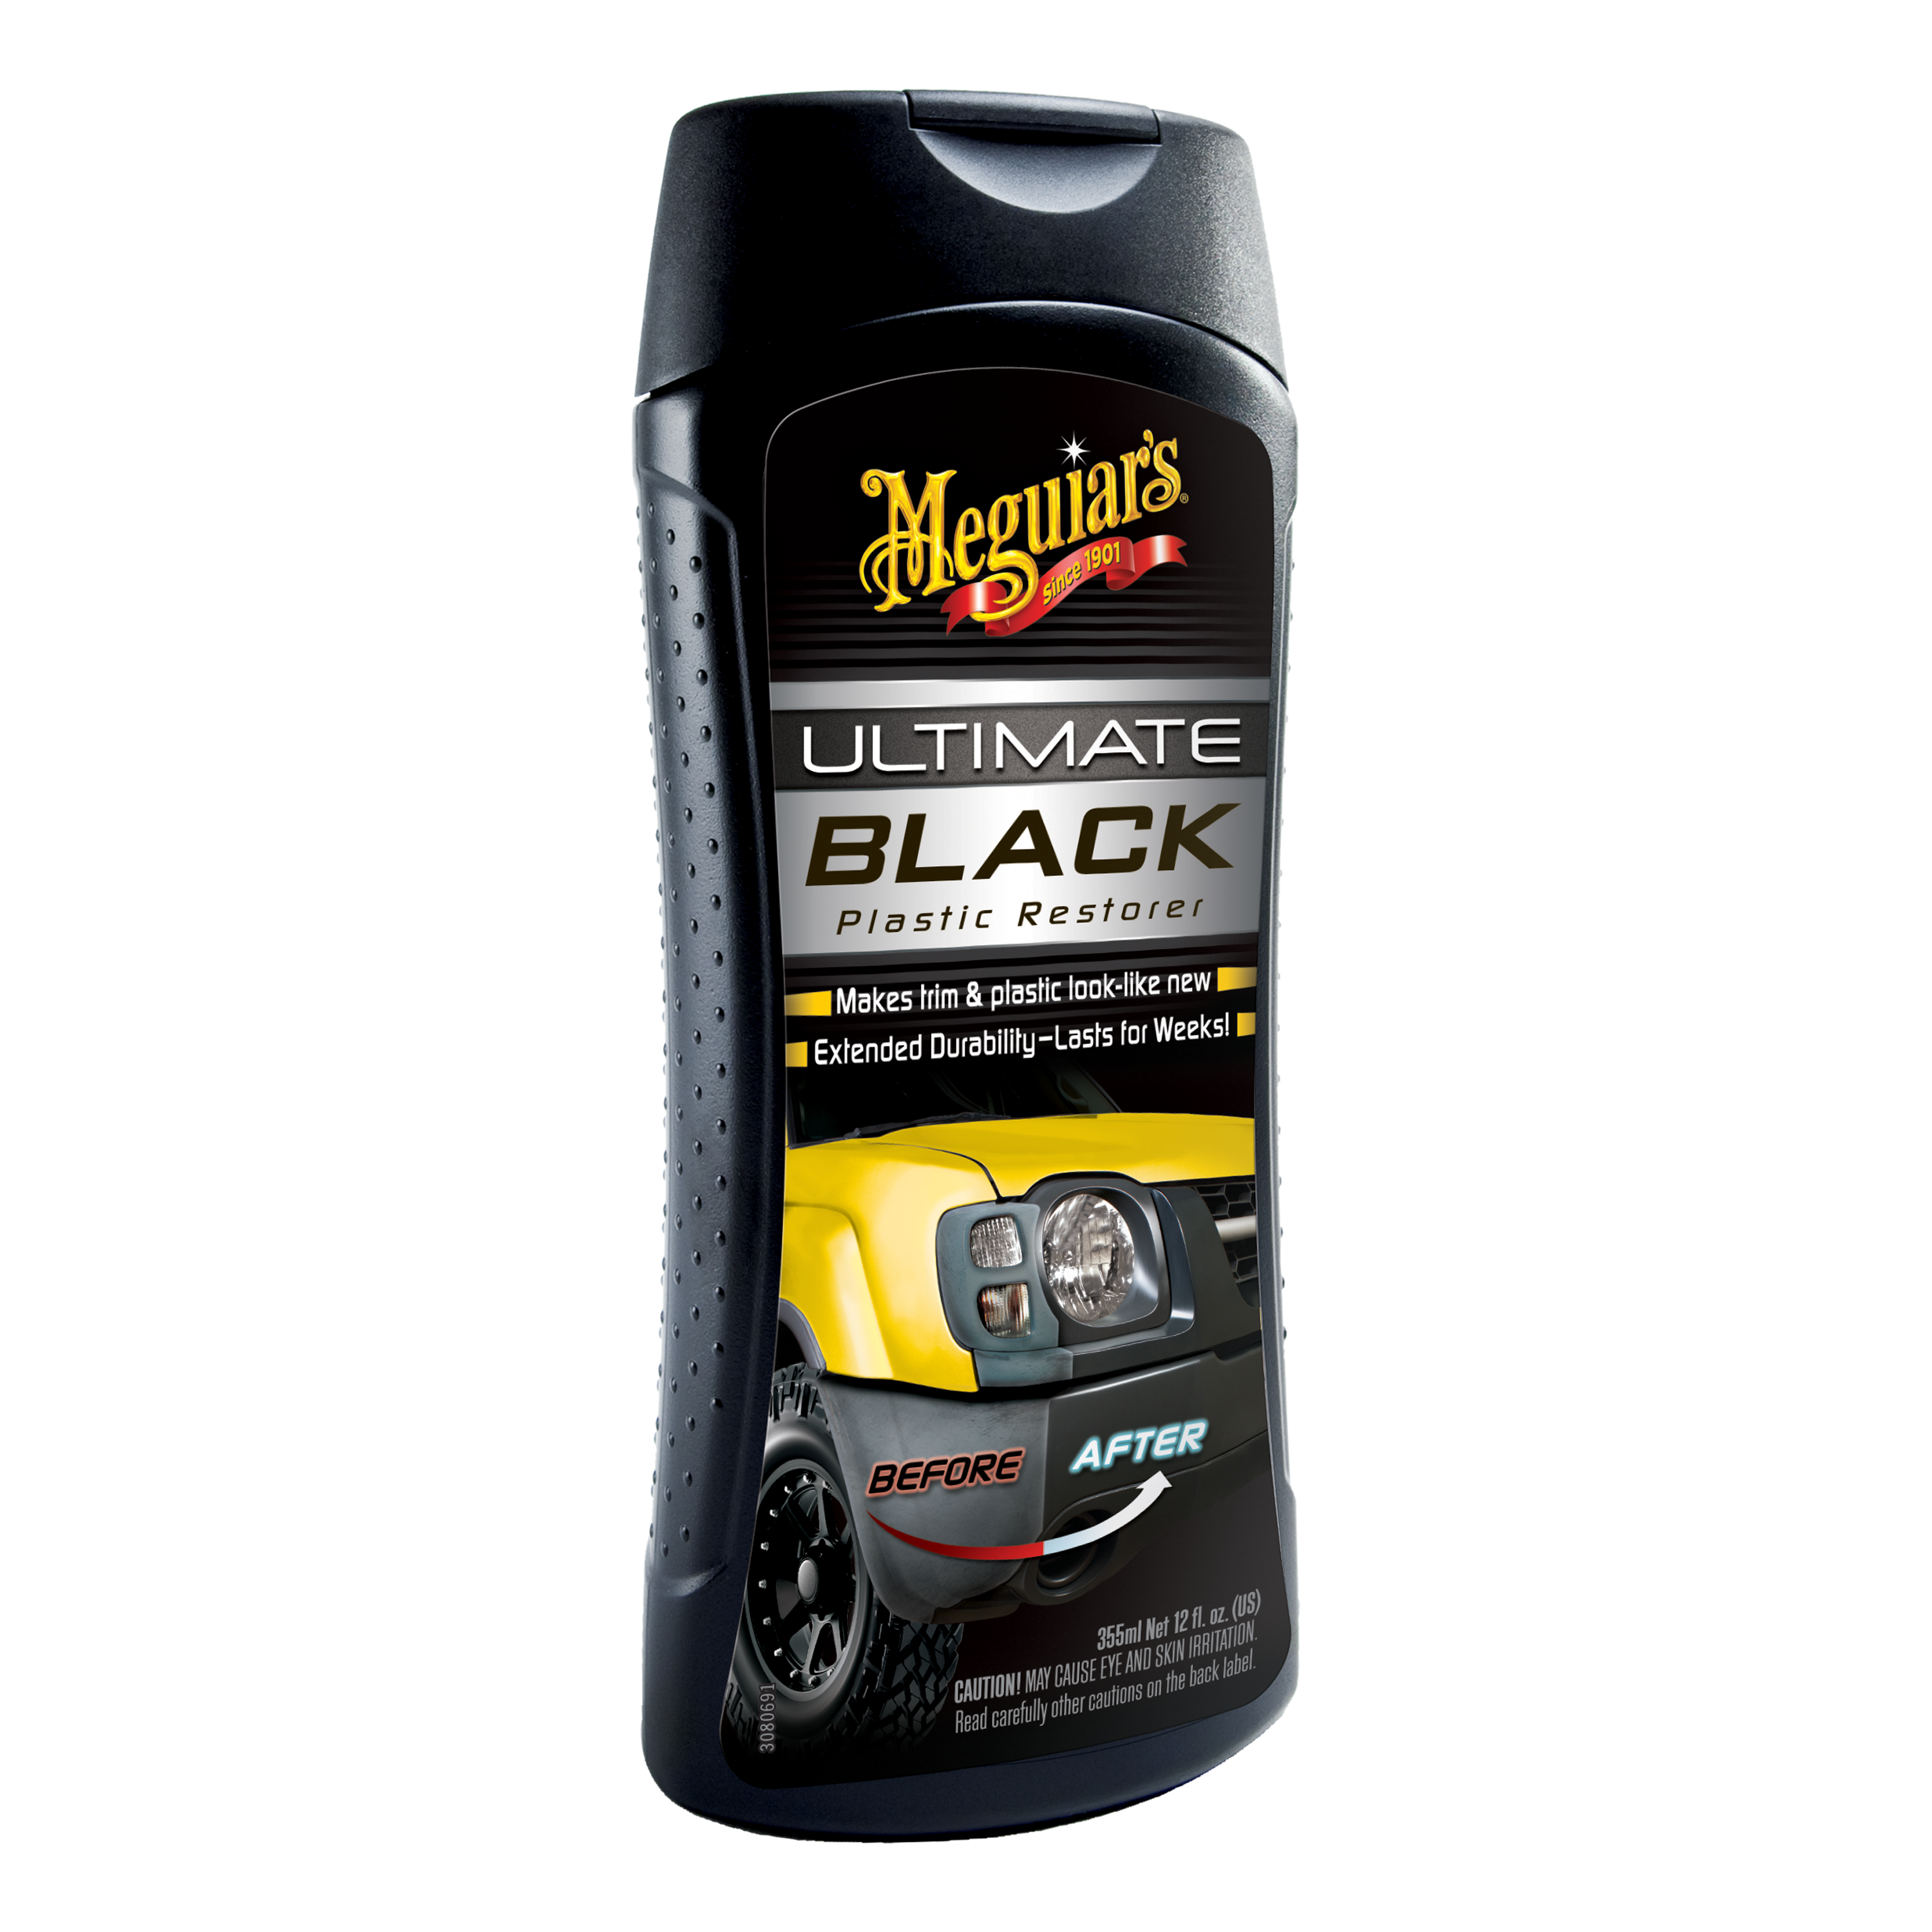 Can Meguiar's Waterless Wash & Wax Finally Sway Our Opinion? 